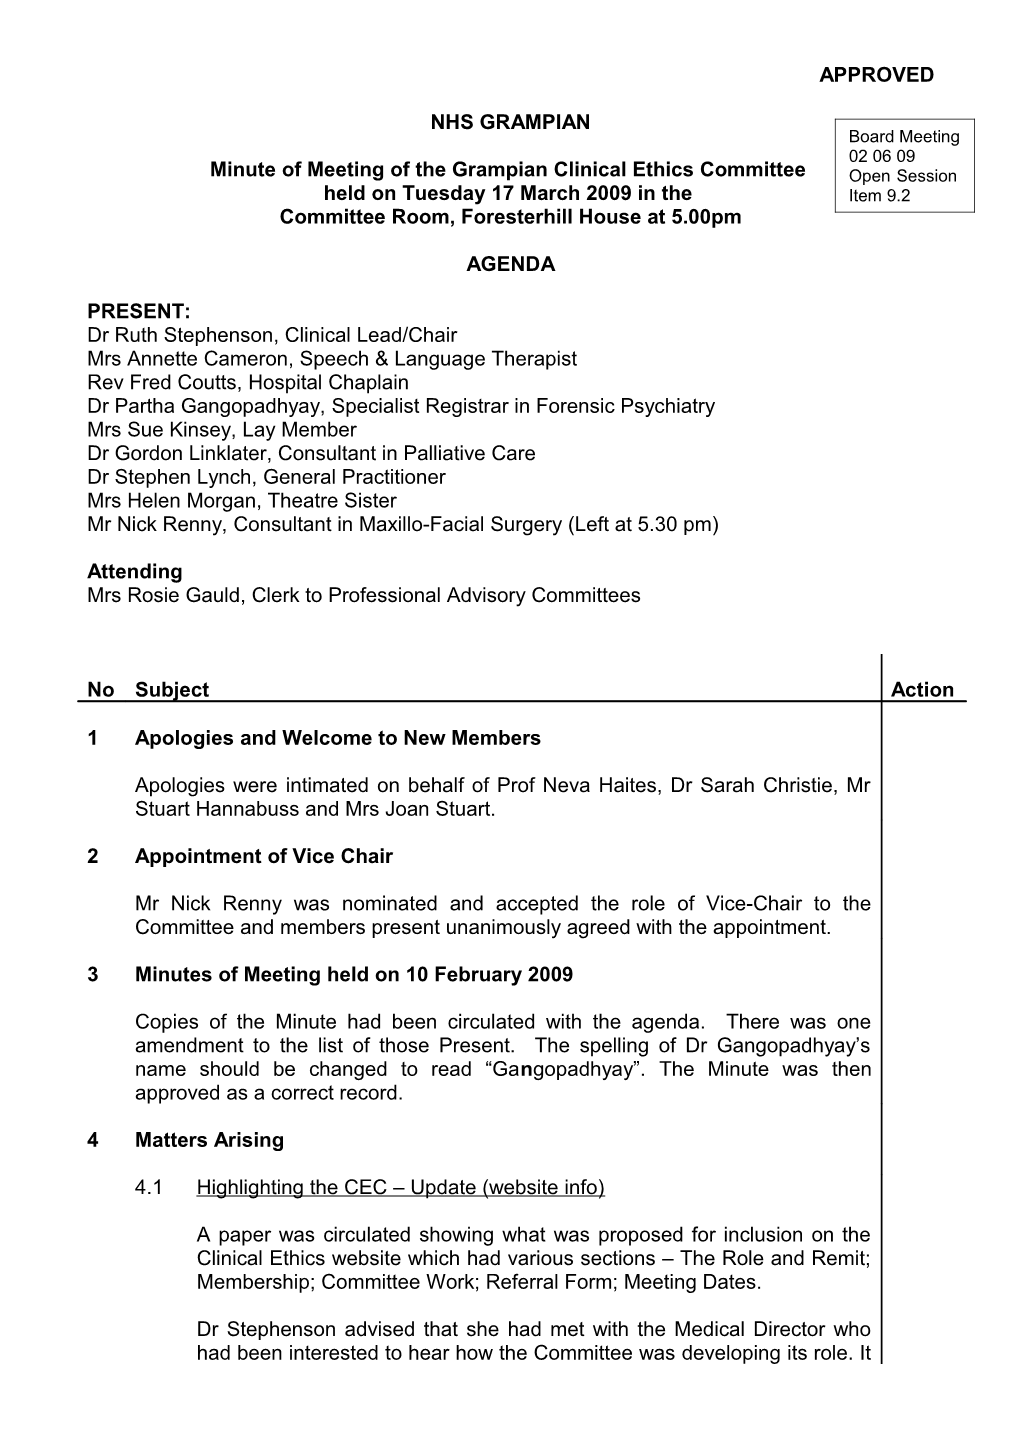 Item 9.2 Jun 09 Clinical Ethics Committee Minute of 17 March 2009